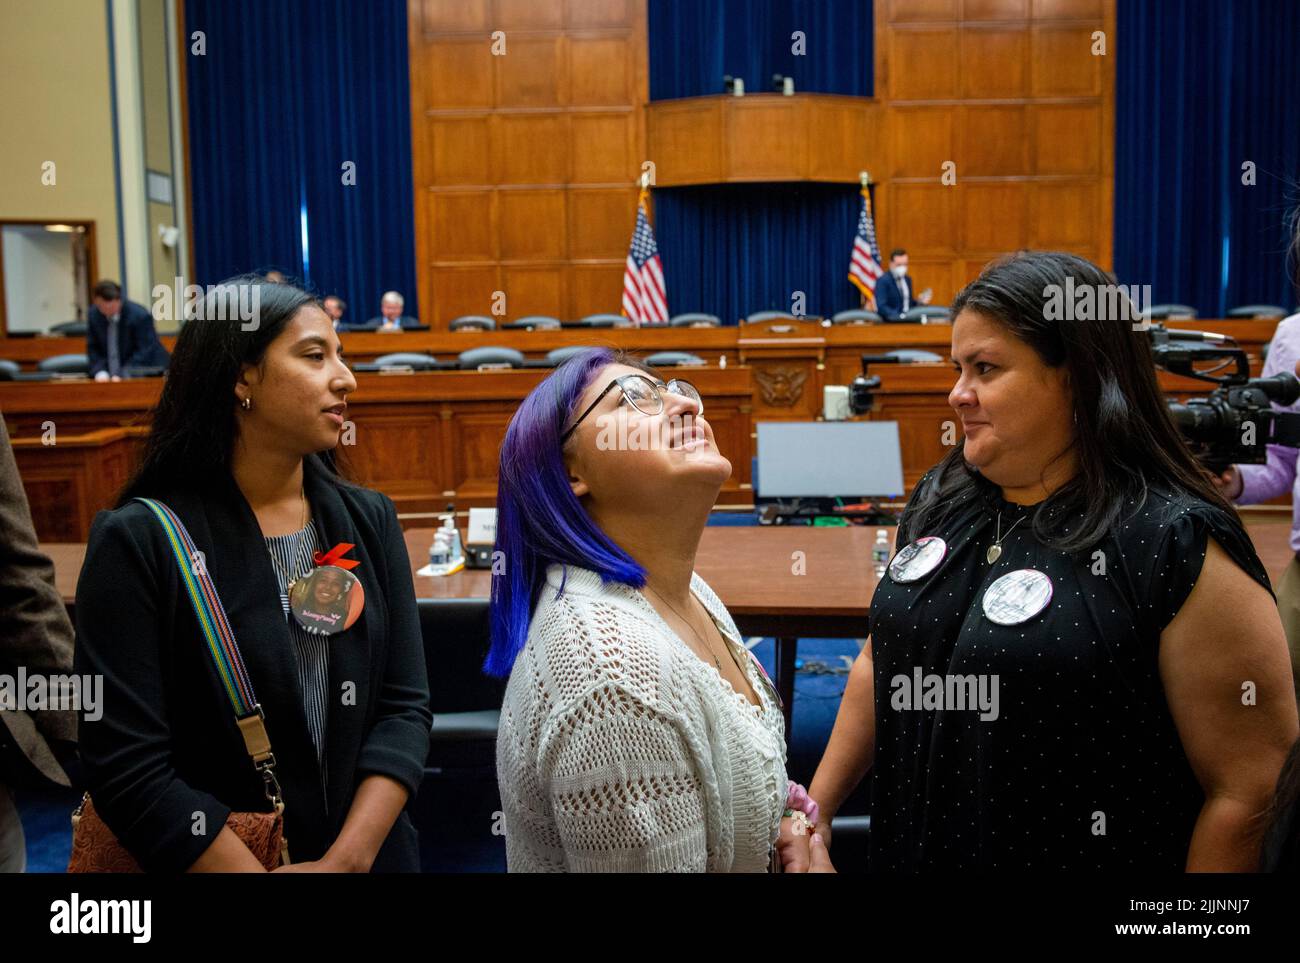 Jazmin Cazares, center, whose nine year-old sister Jacklyn Cazares, was one of the children killed by a gunman at Robb Elementary School in Uvalde, Texas, talks with her mother Gloria Cazares, right, and Kimberly Rubio, left, whose daughter Alexandria Rubio was one of the children killed by a gunman at Robb Elementary School in Uvalde, Texas, during a recess in a House Committee on Oversight and Reform hearing “Examining the Practices and Profits of Gun Manufacturers” in the Rayburn House Office Building in Washington, DC, July 27, 2022. Credit: Rod Lamkey/CNP /MediaPunch Stock Photo